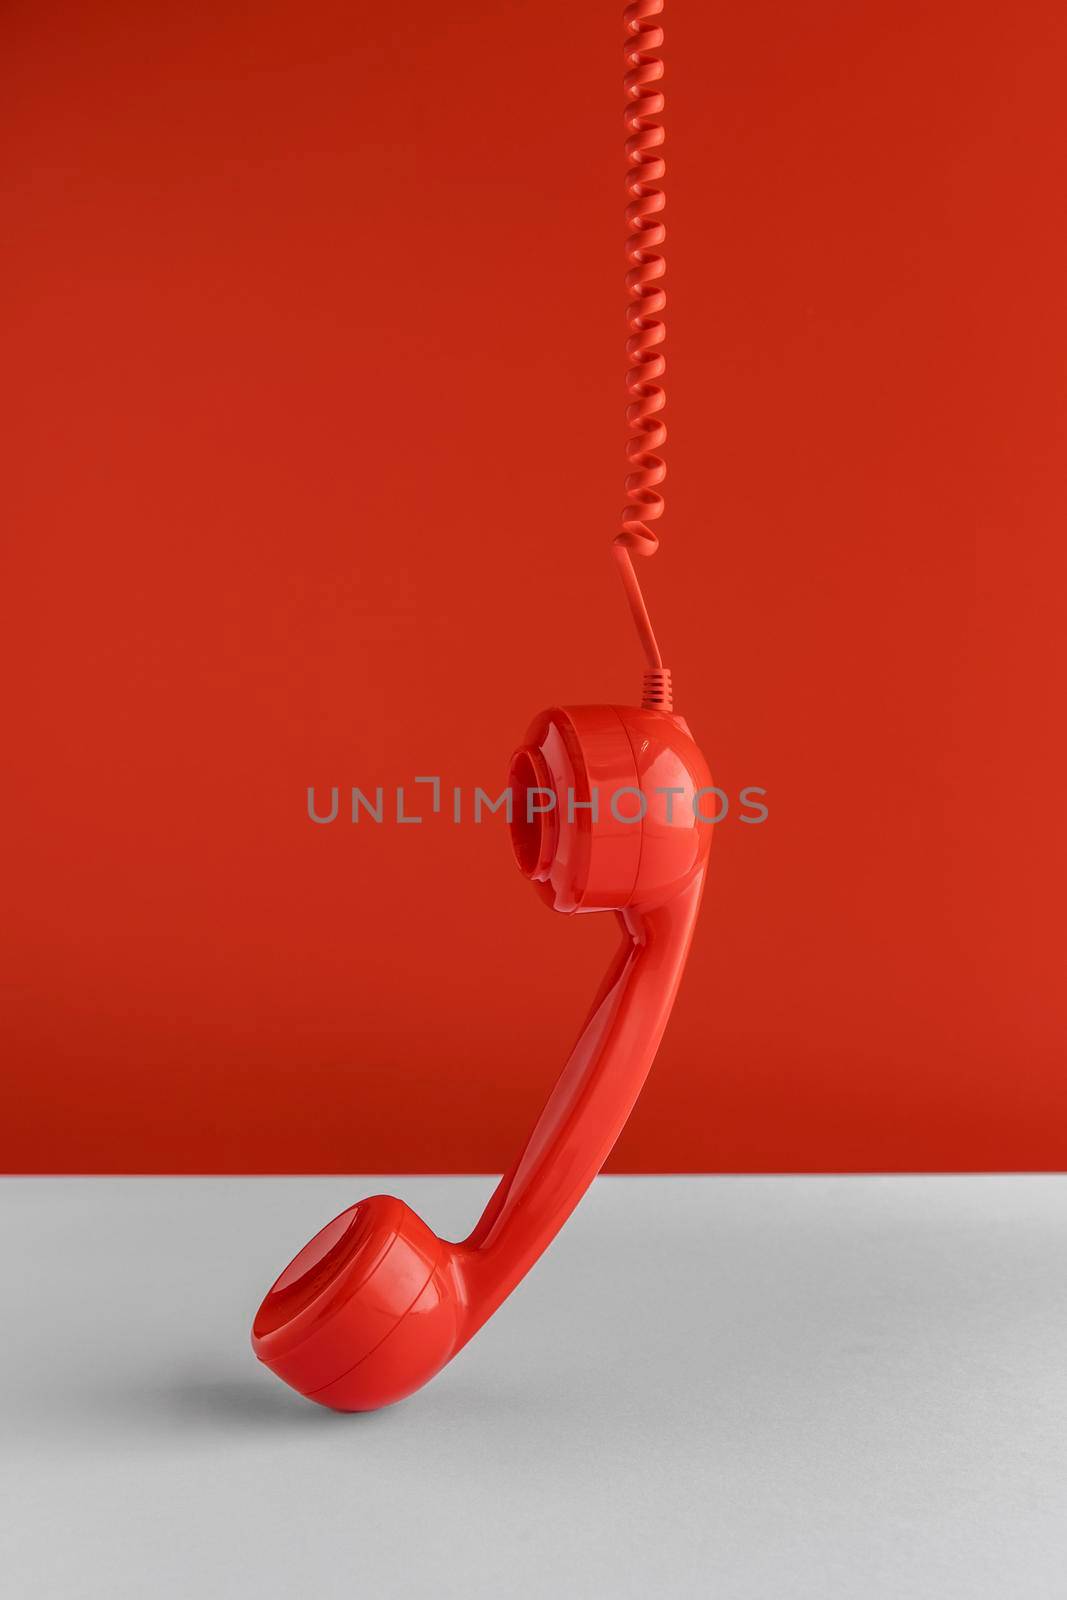 front view telephone receiver hanging from cord. High quality photo by Zahard